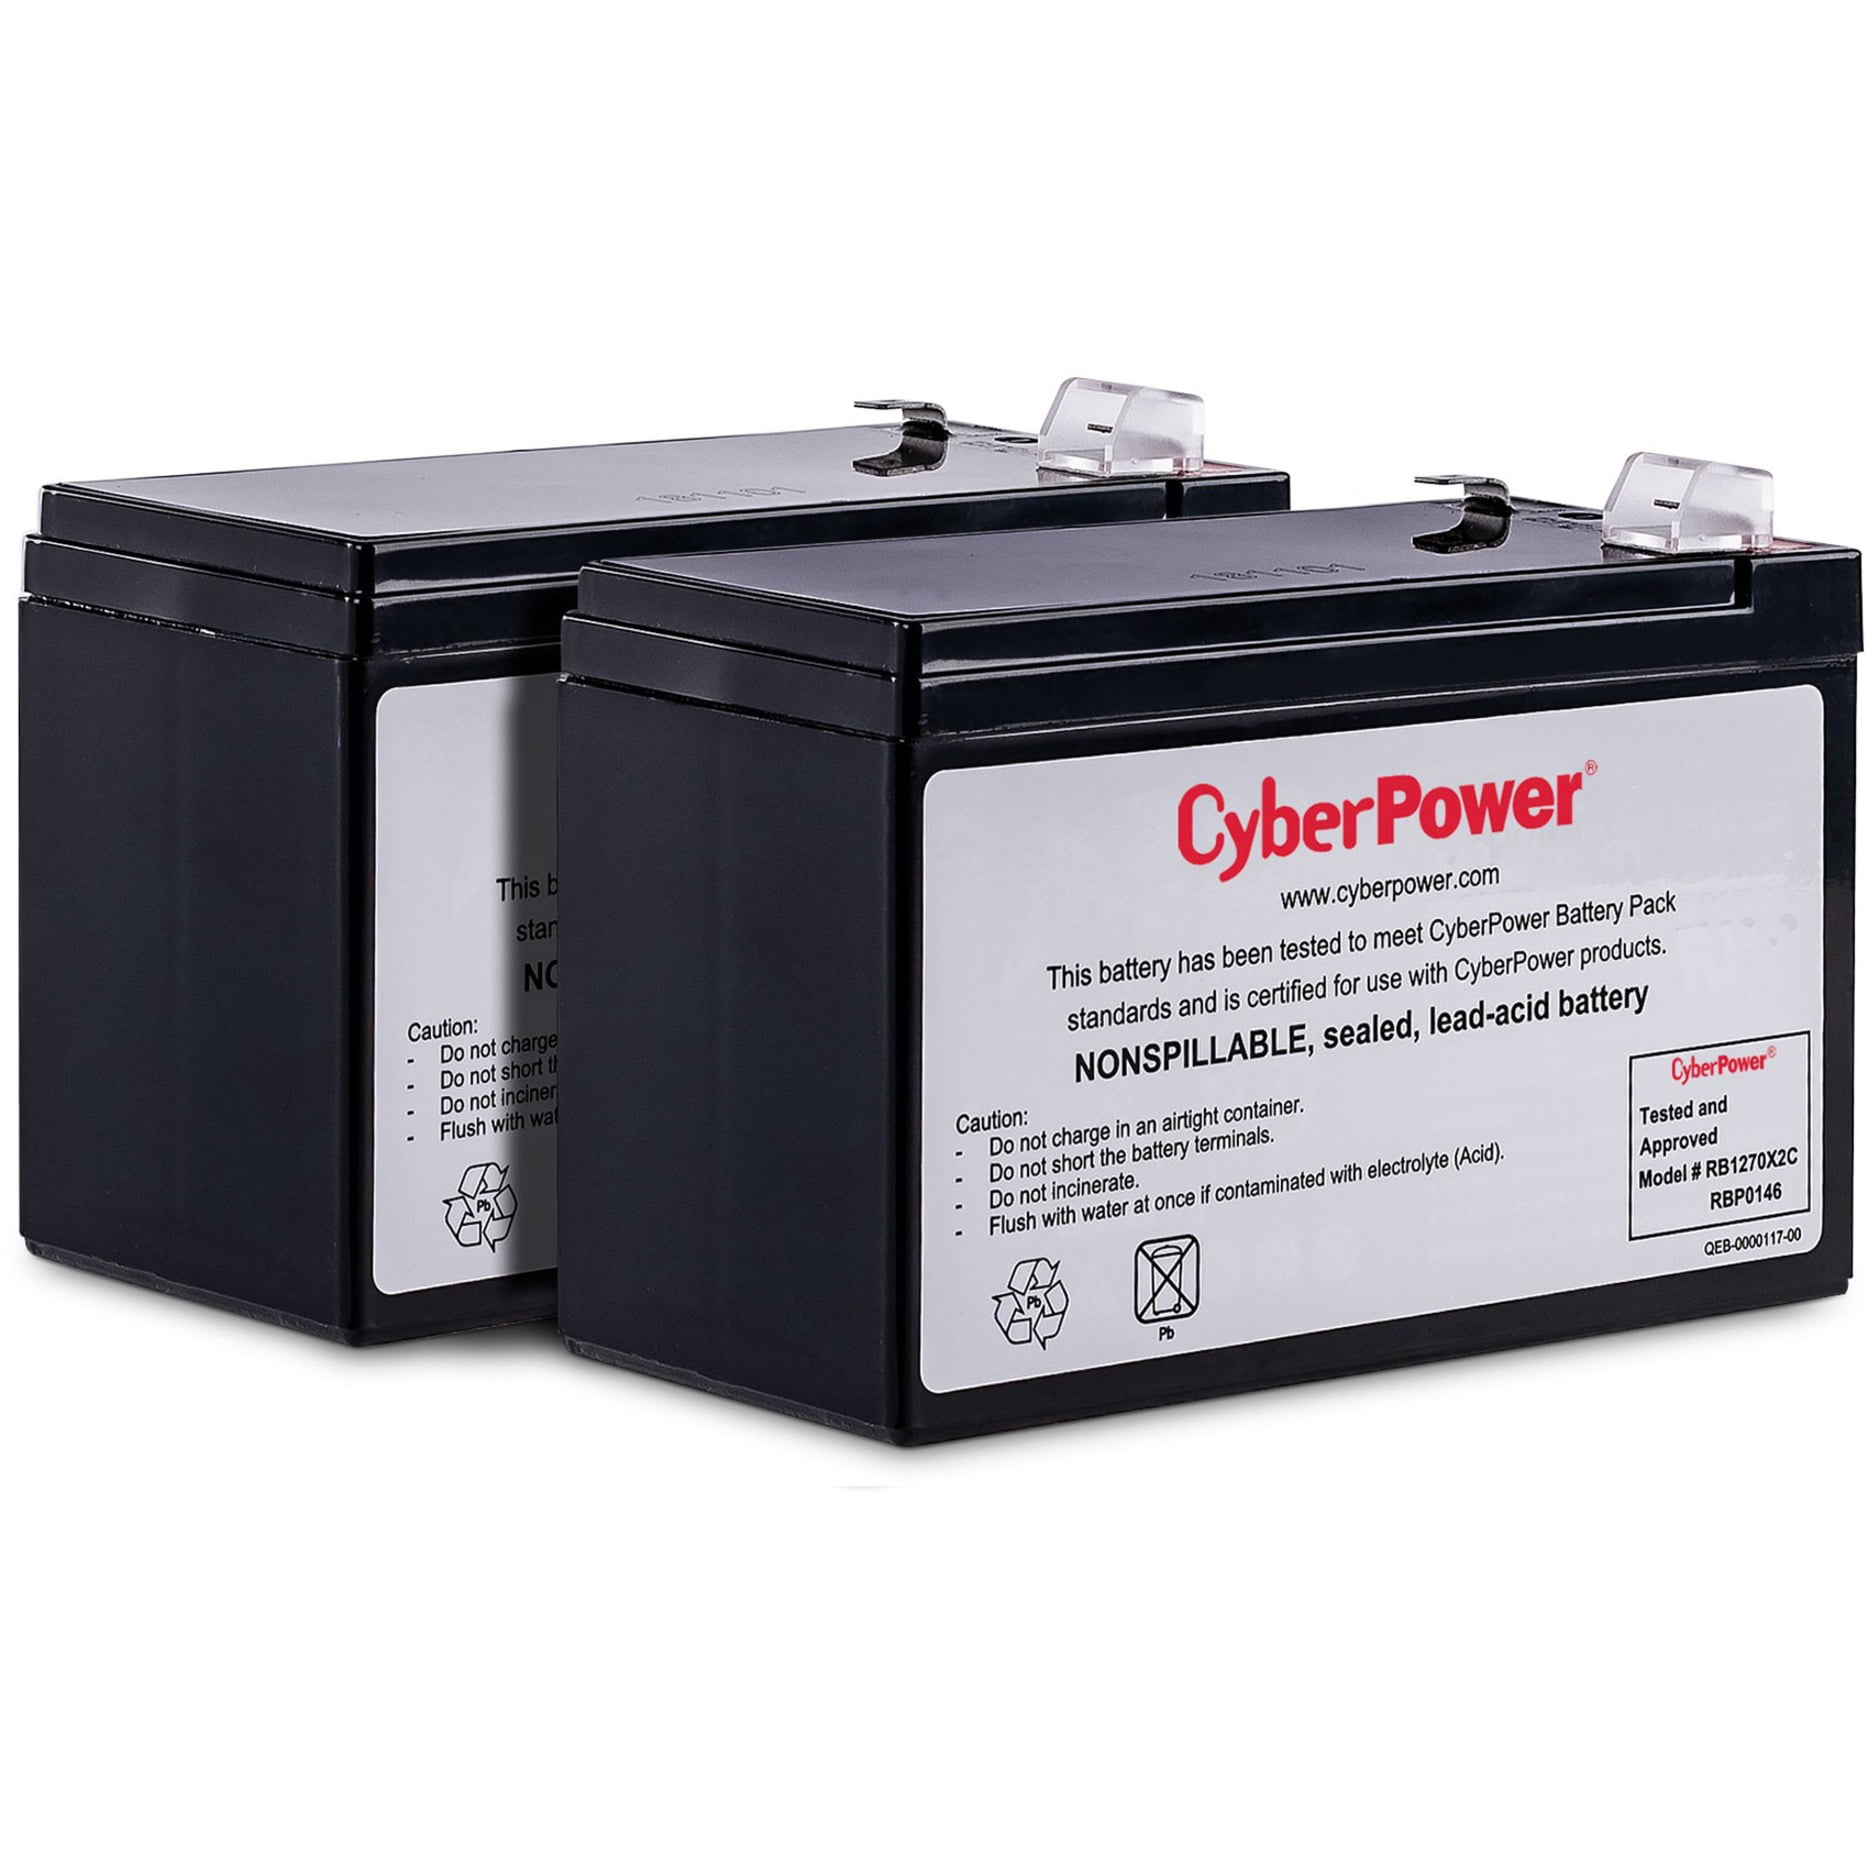 CyberPower RB0670X2 Replacement Battery Cartridge User Installable Maintenance-Free 